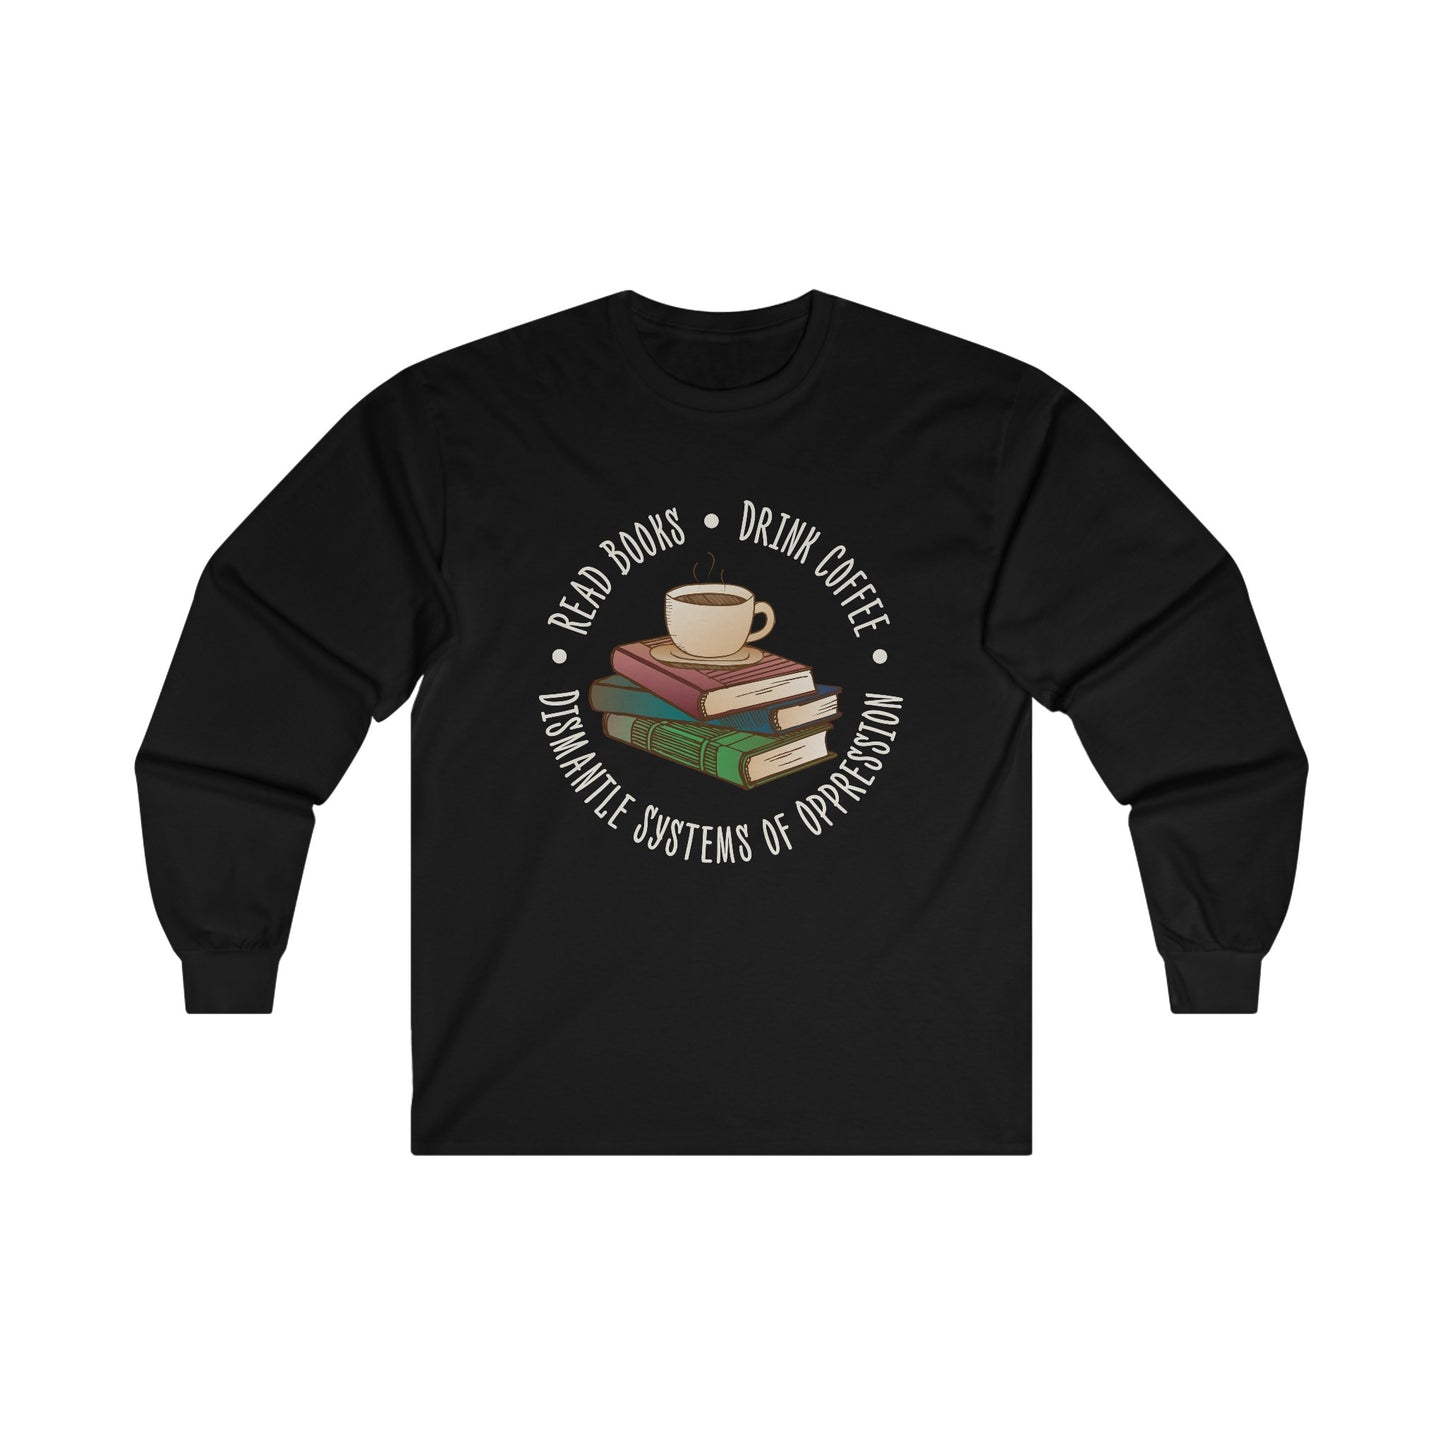 “Dismantle Systems of Oppression” Unisex Long Sleeve T-Shirt